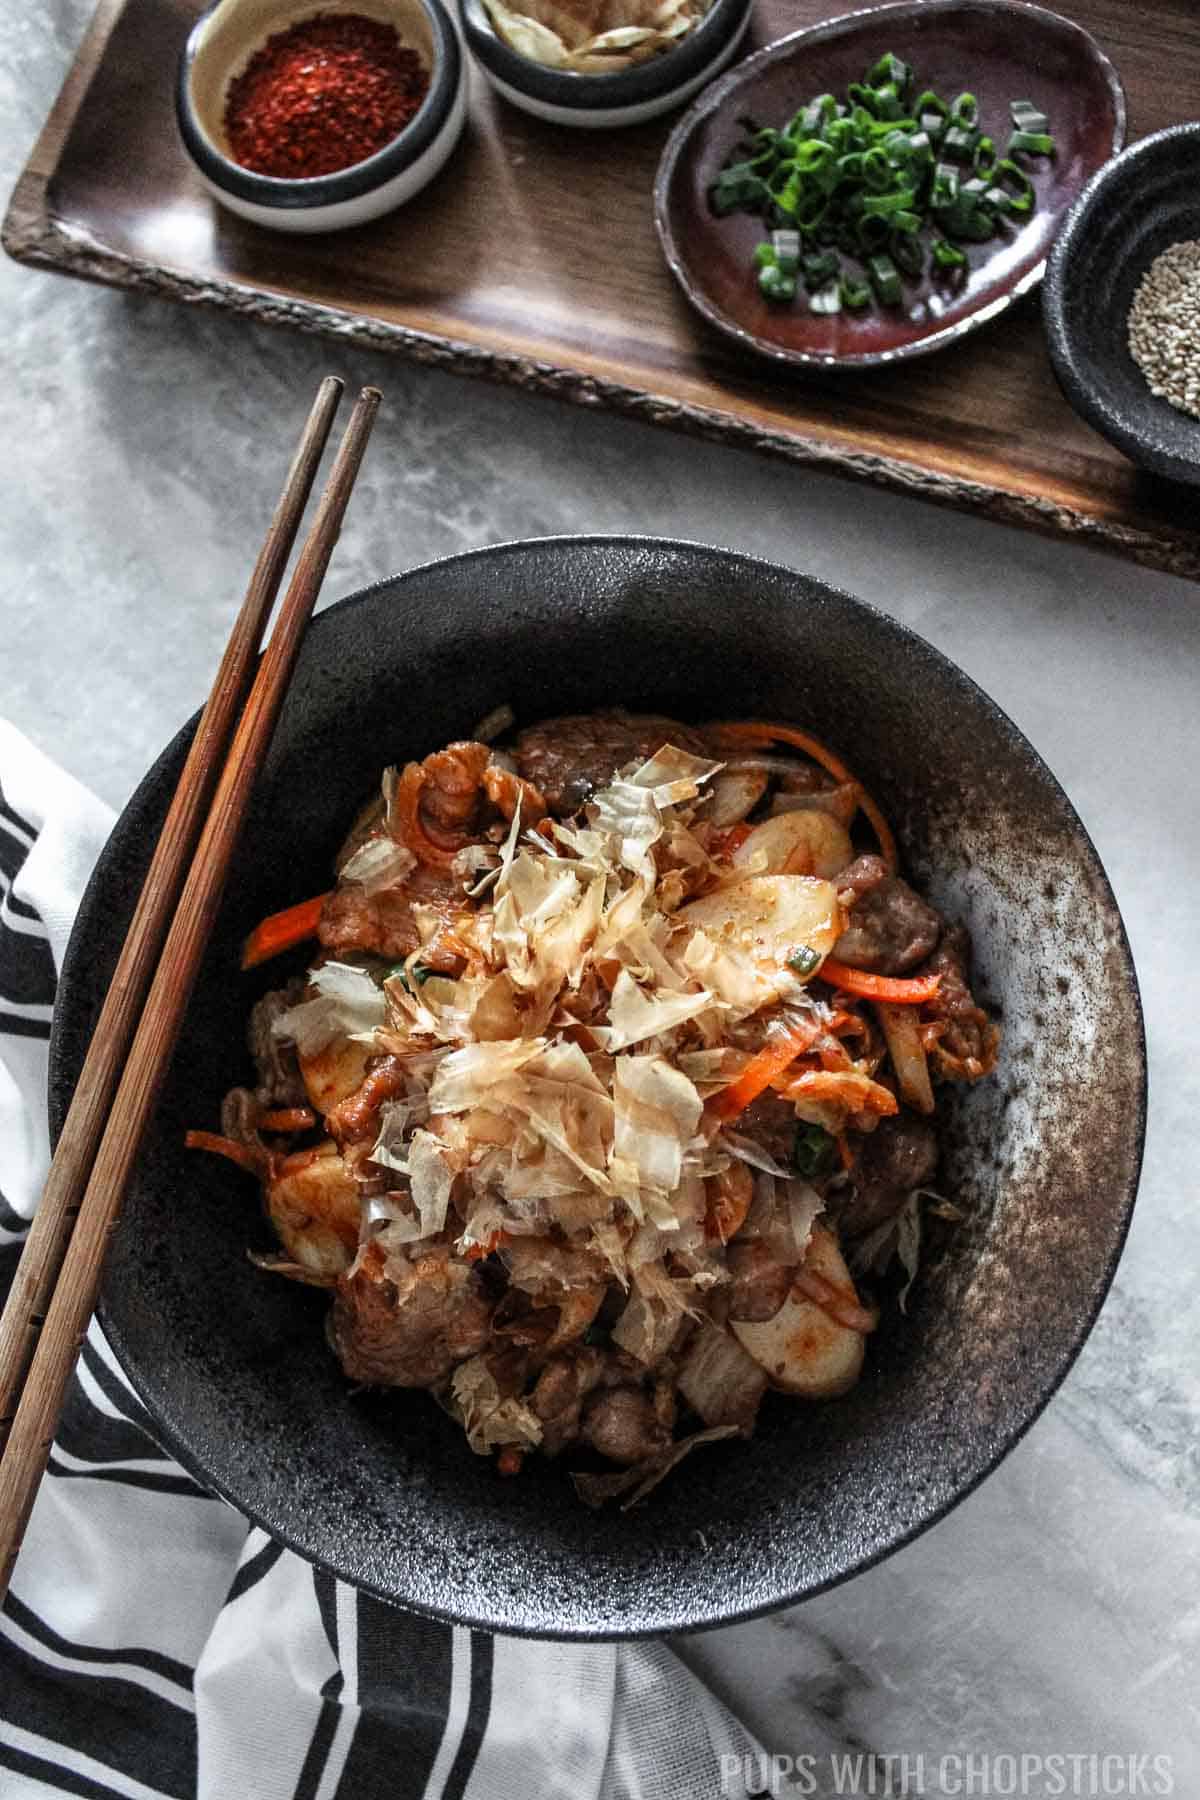 Stir-fried rice cakes with bonito flakes on top served in a black bowl.